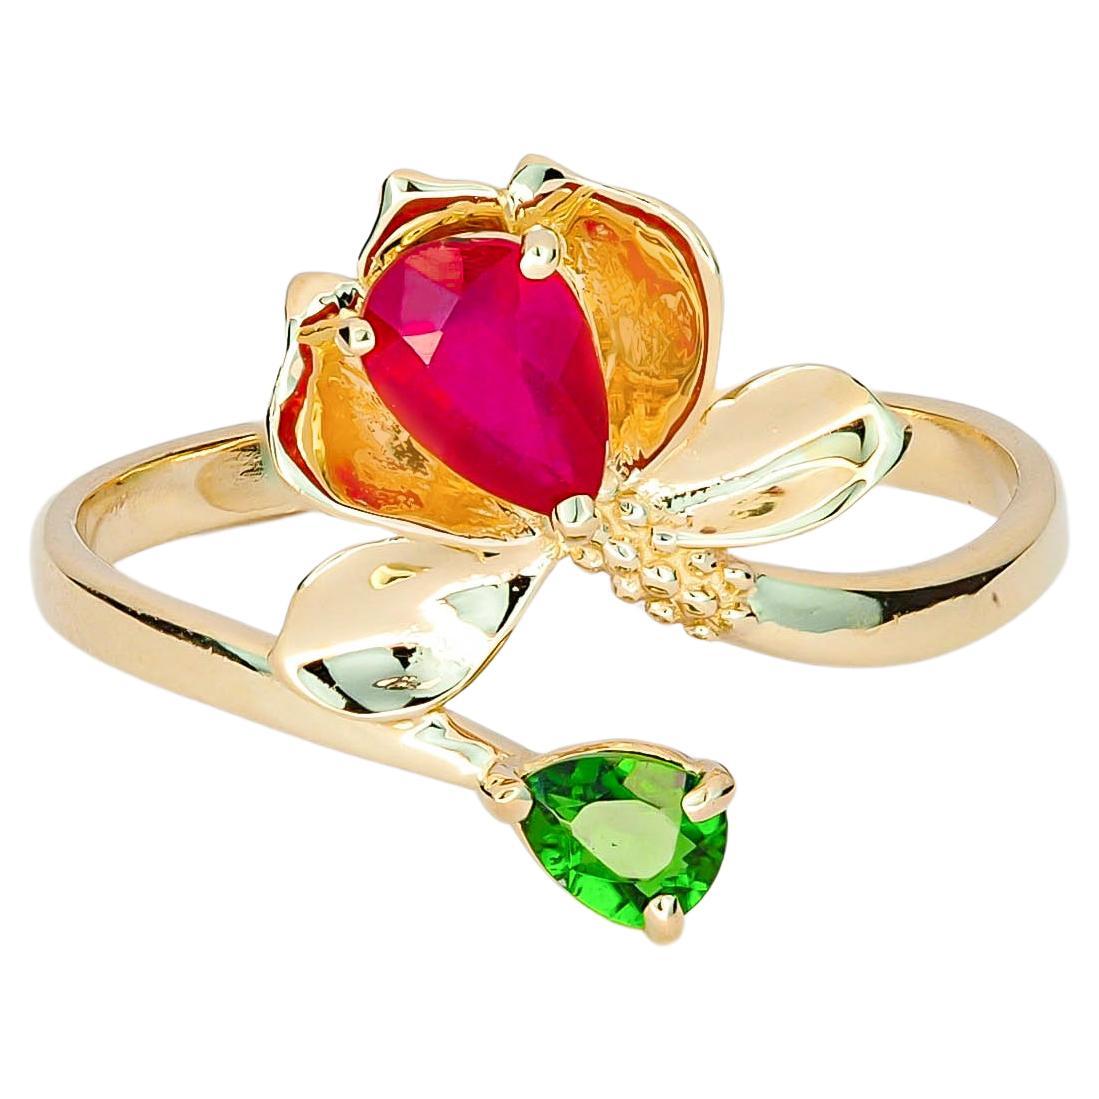 For Sale:  14 K Gold Ring with Ruby and Chrome Diopside. Water Lily Flower Gold Ring!